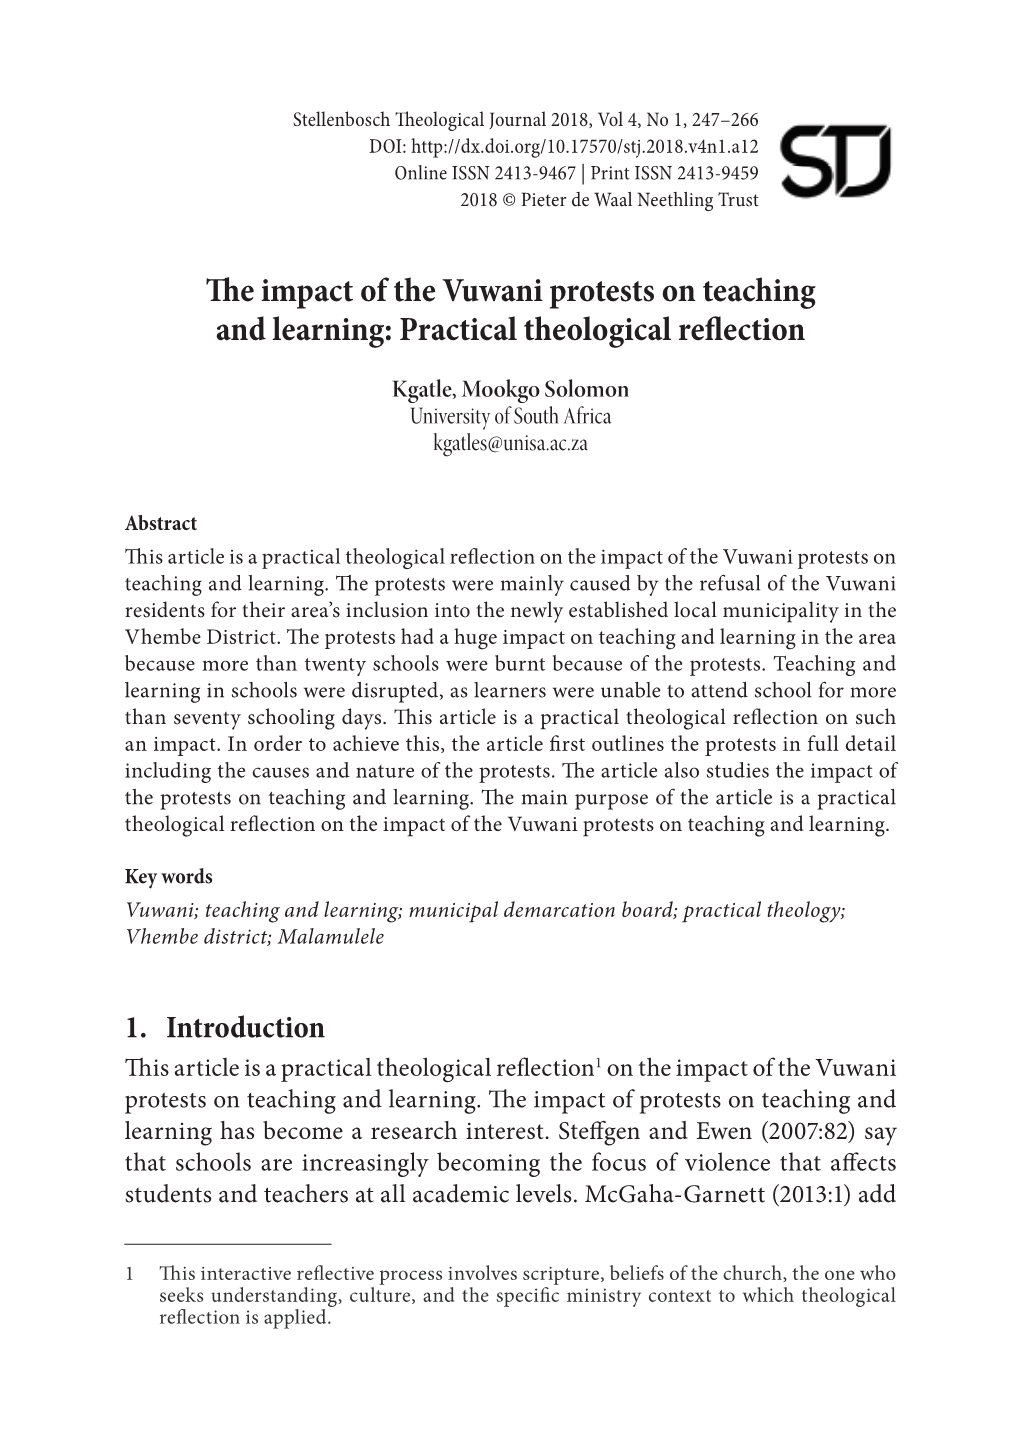 The Impact of the Vuwani Protests on Teaching and Learning: Practical Theological Reflection